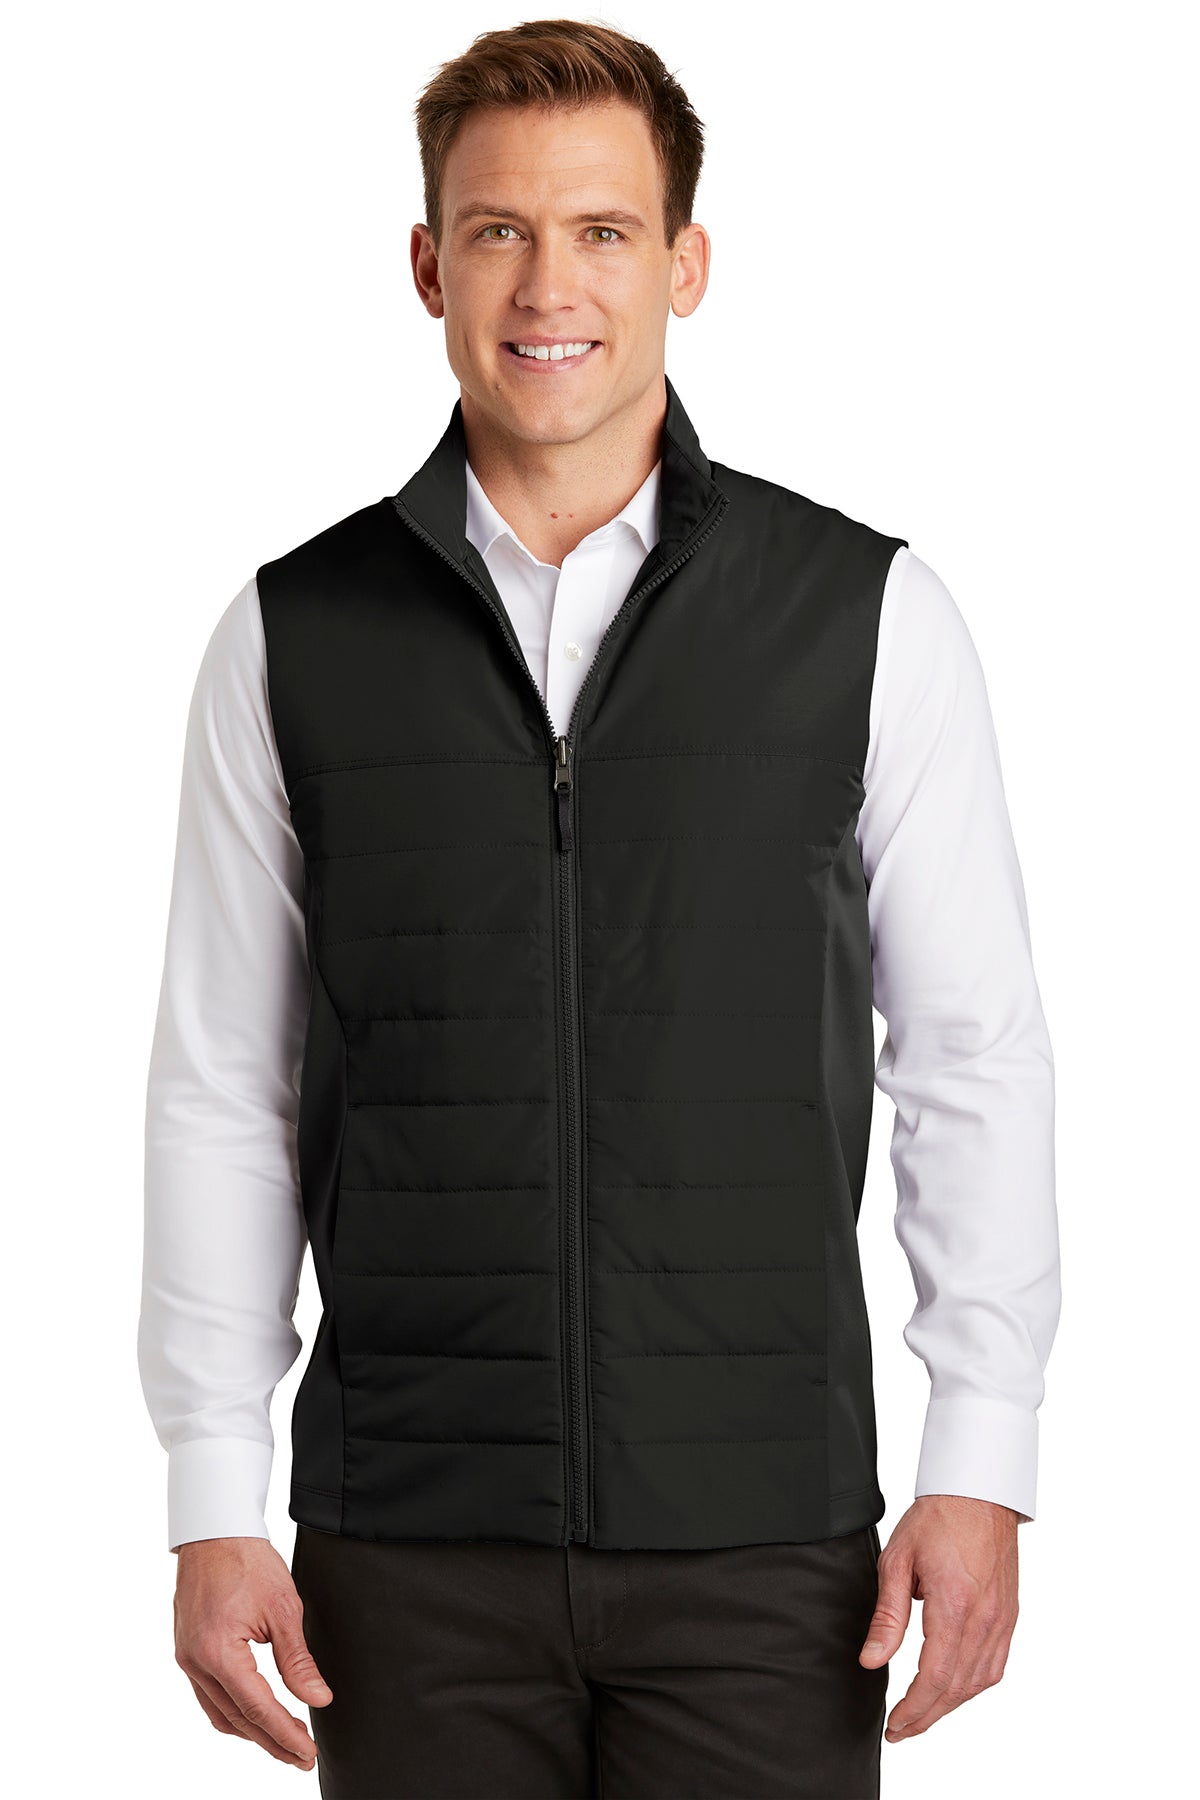 Windsor - Collective Insulated Vest with W - Black - Southern Grace Creations